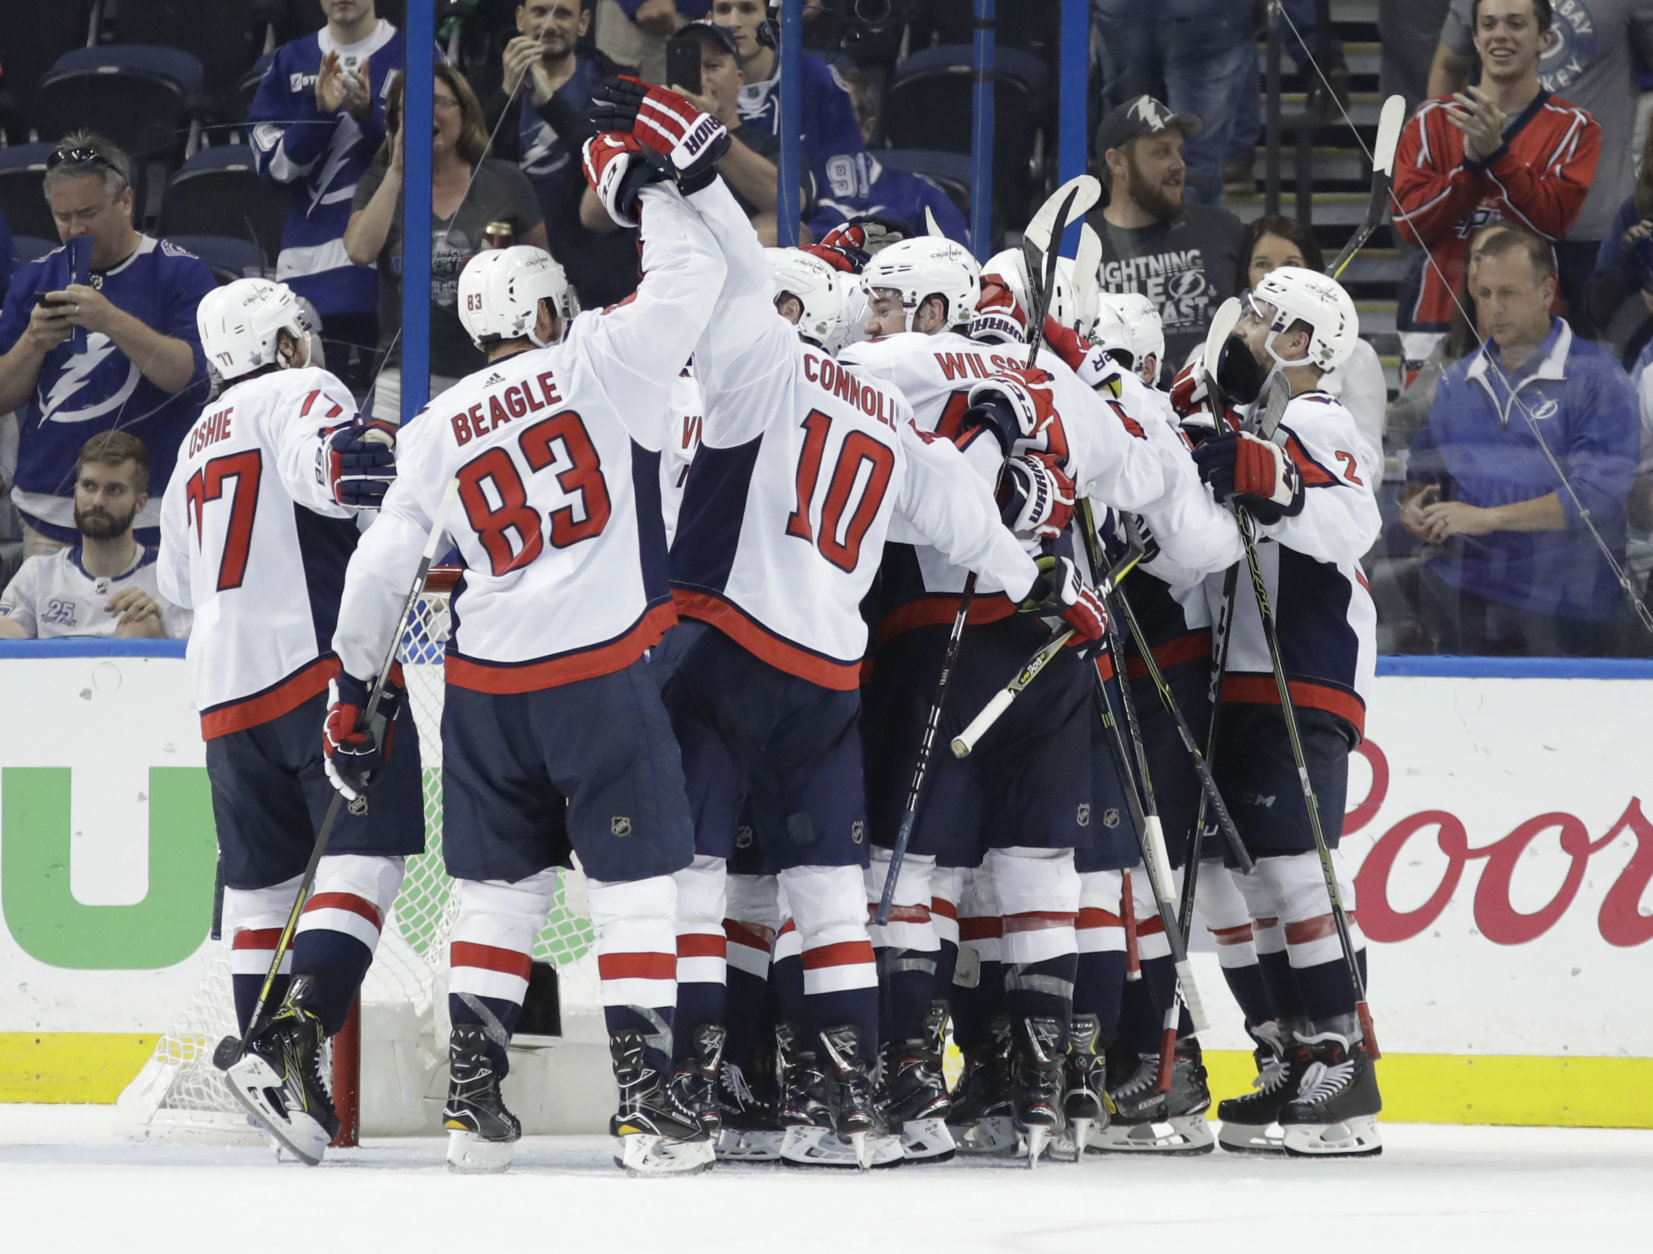 Washington Capitals celebrate after defeating the Tampa Bay Lightning 4-0 in Game 7 of the NHL Eastern Conference finals hockey playoff series Wednesday, May 23, 2018, in Tampa, Fla. (AP Photo/Chris O'Meara)